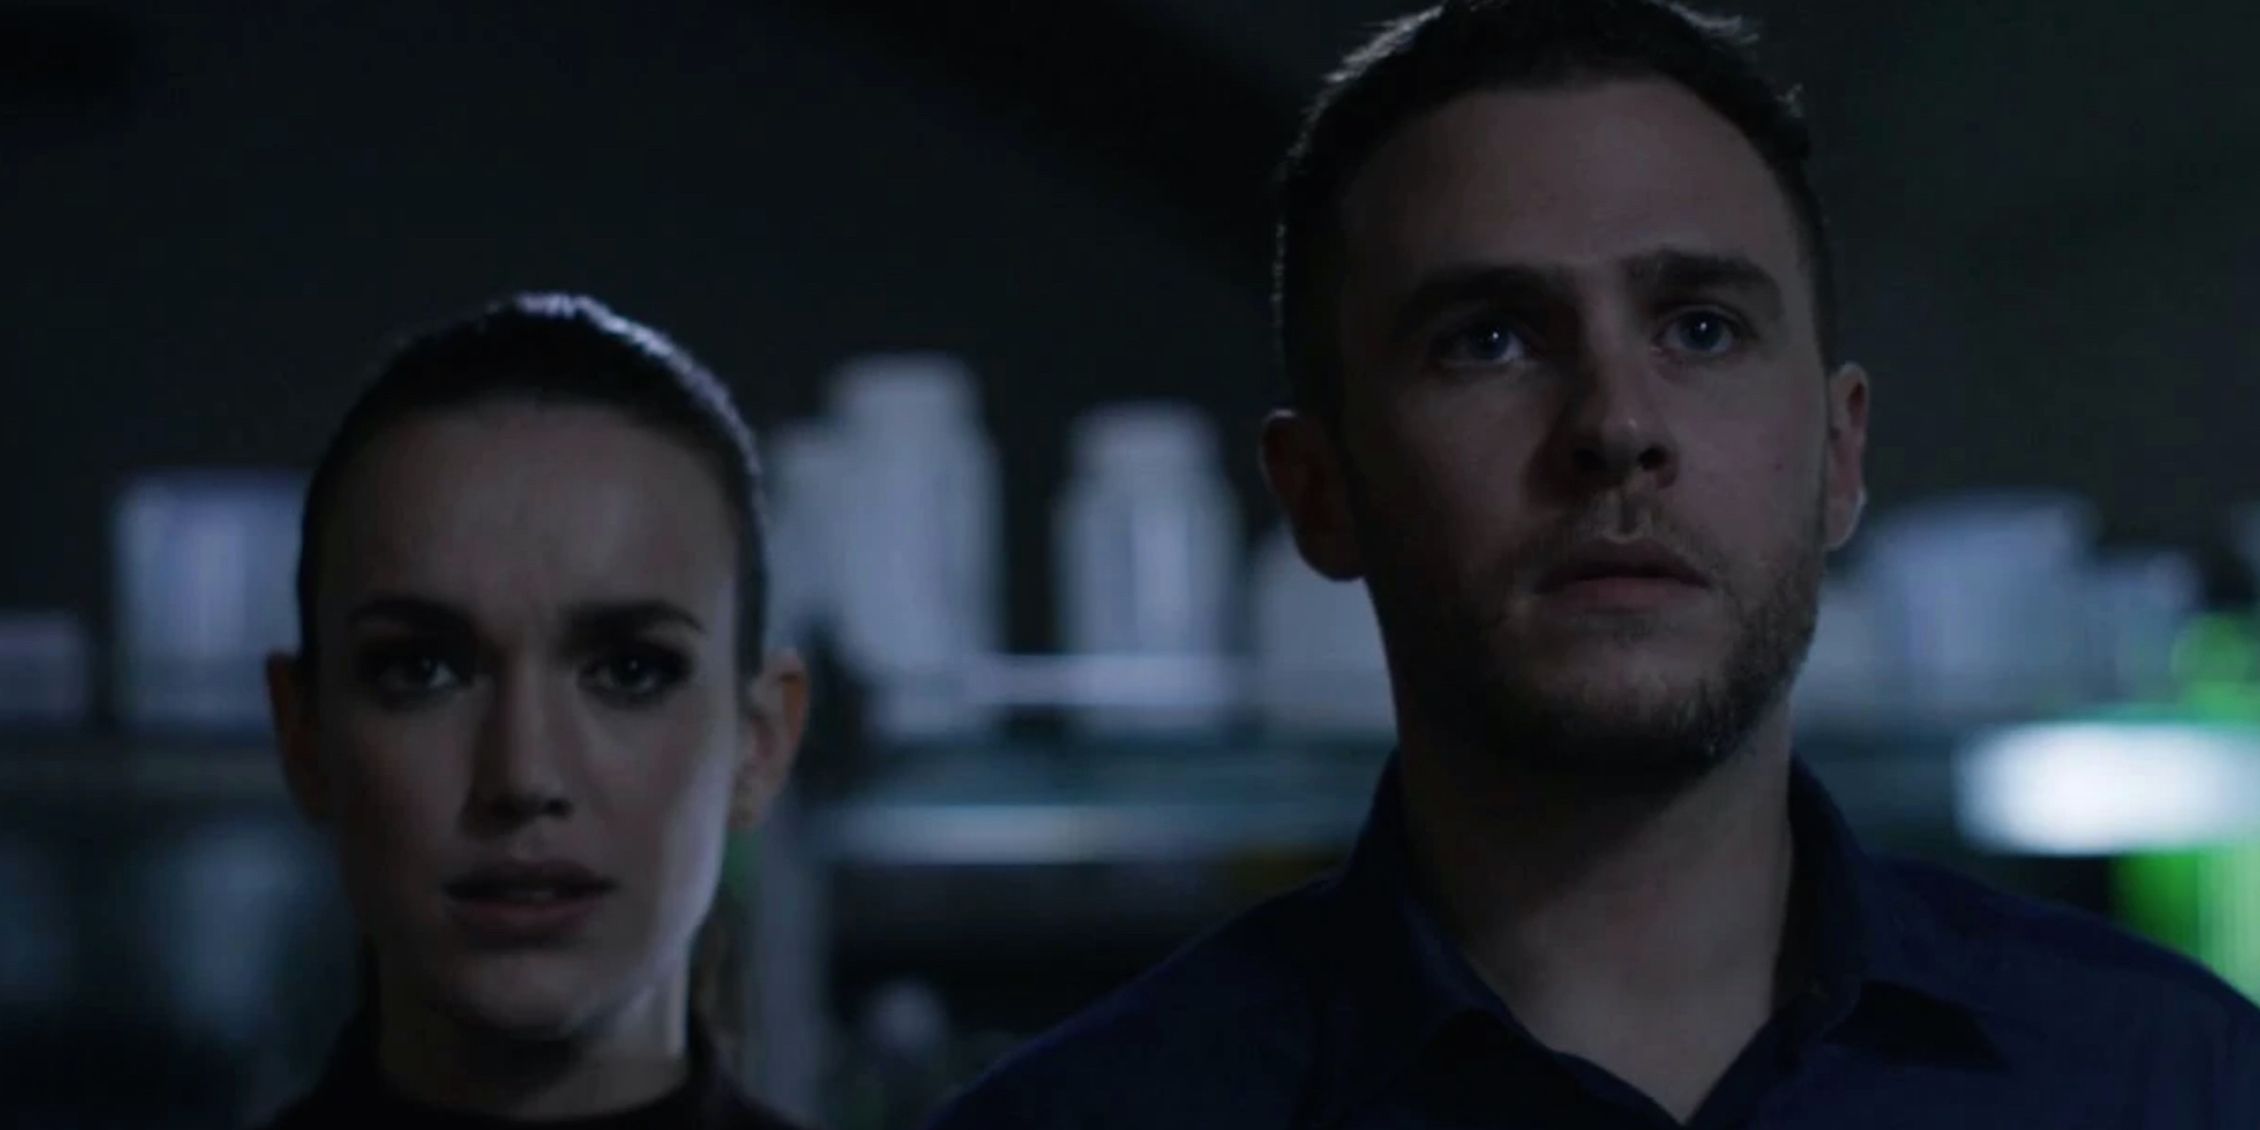 Jemma and Fitz in Agents Of SHIELD's Self Control